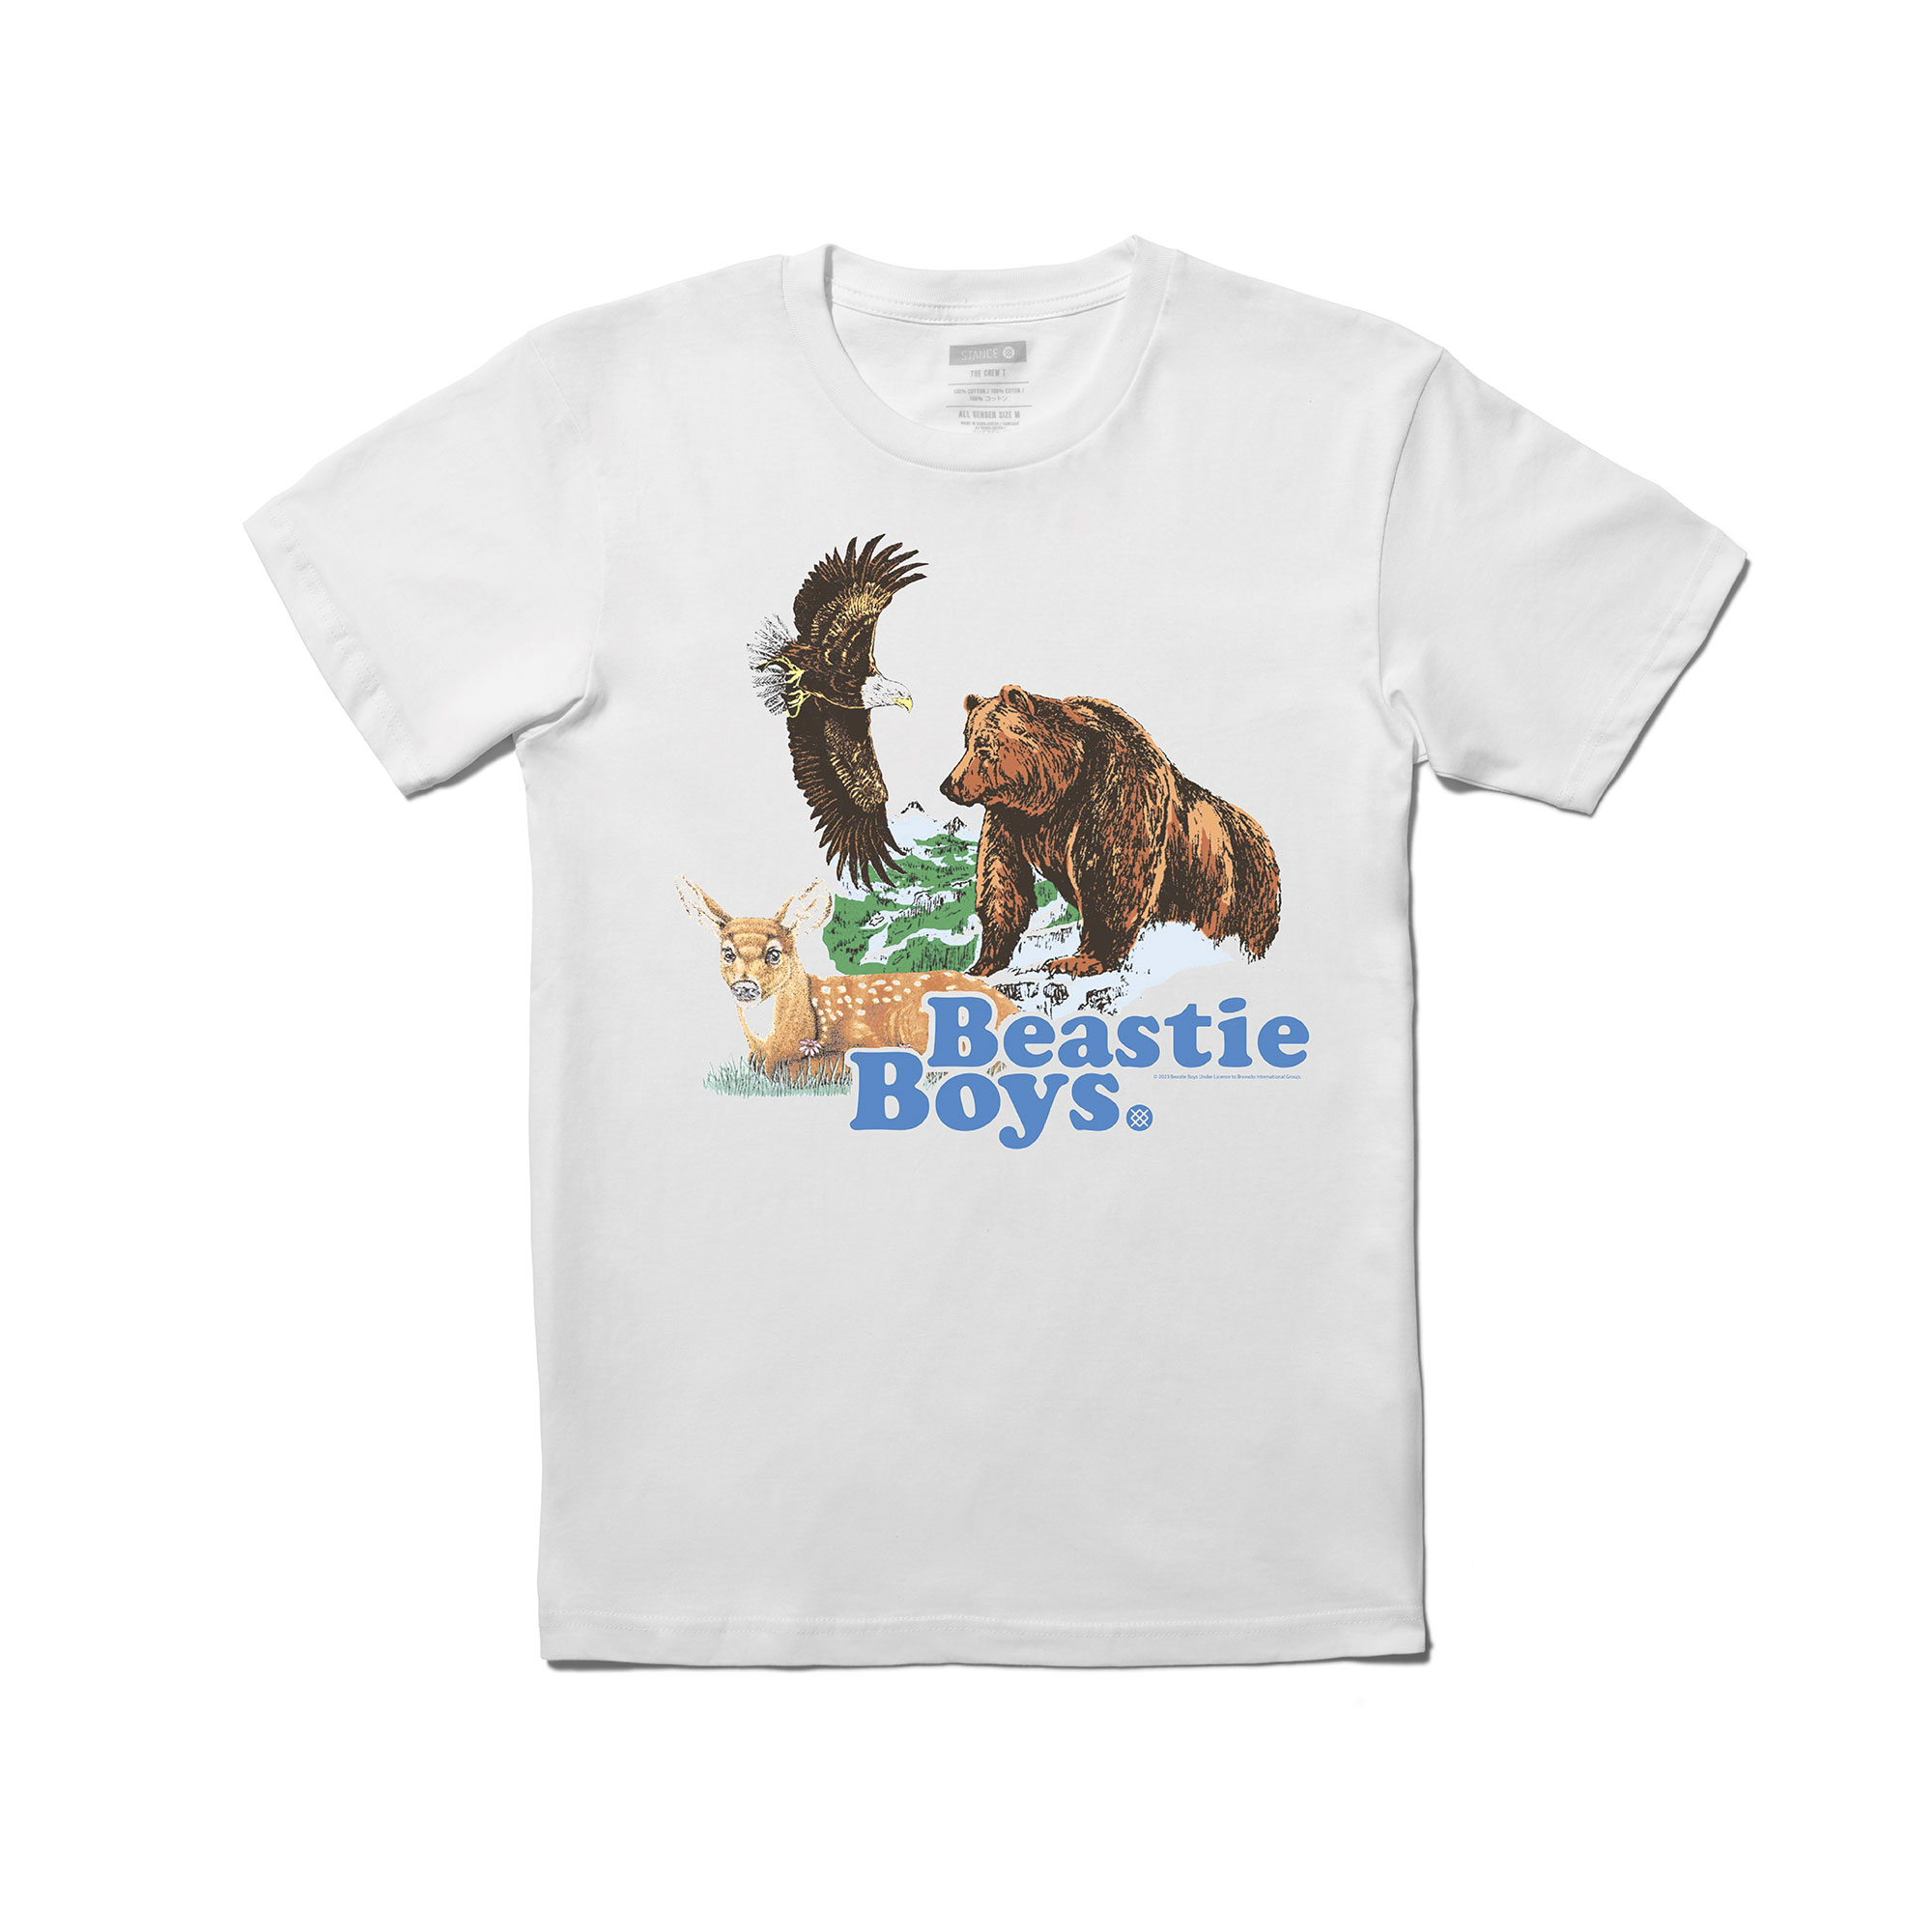 Beastie Boys X Stance Great Outdoors T-Shirt | Stance